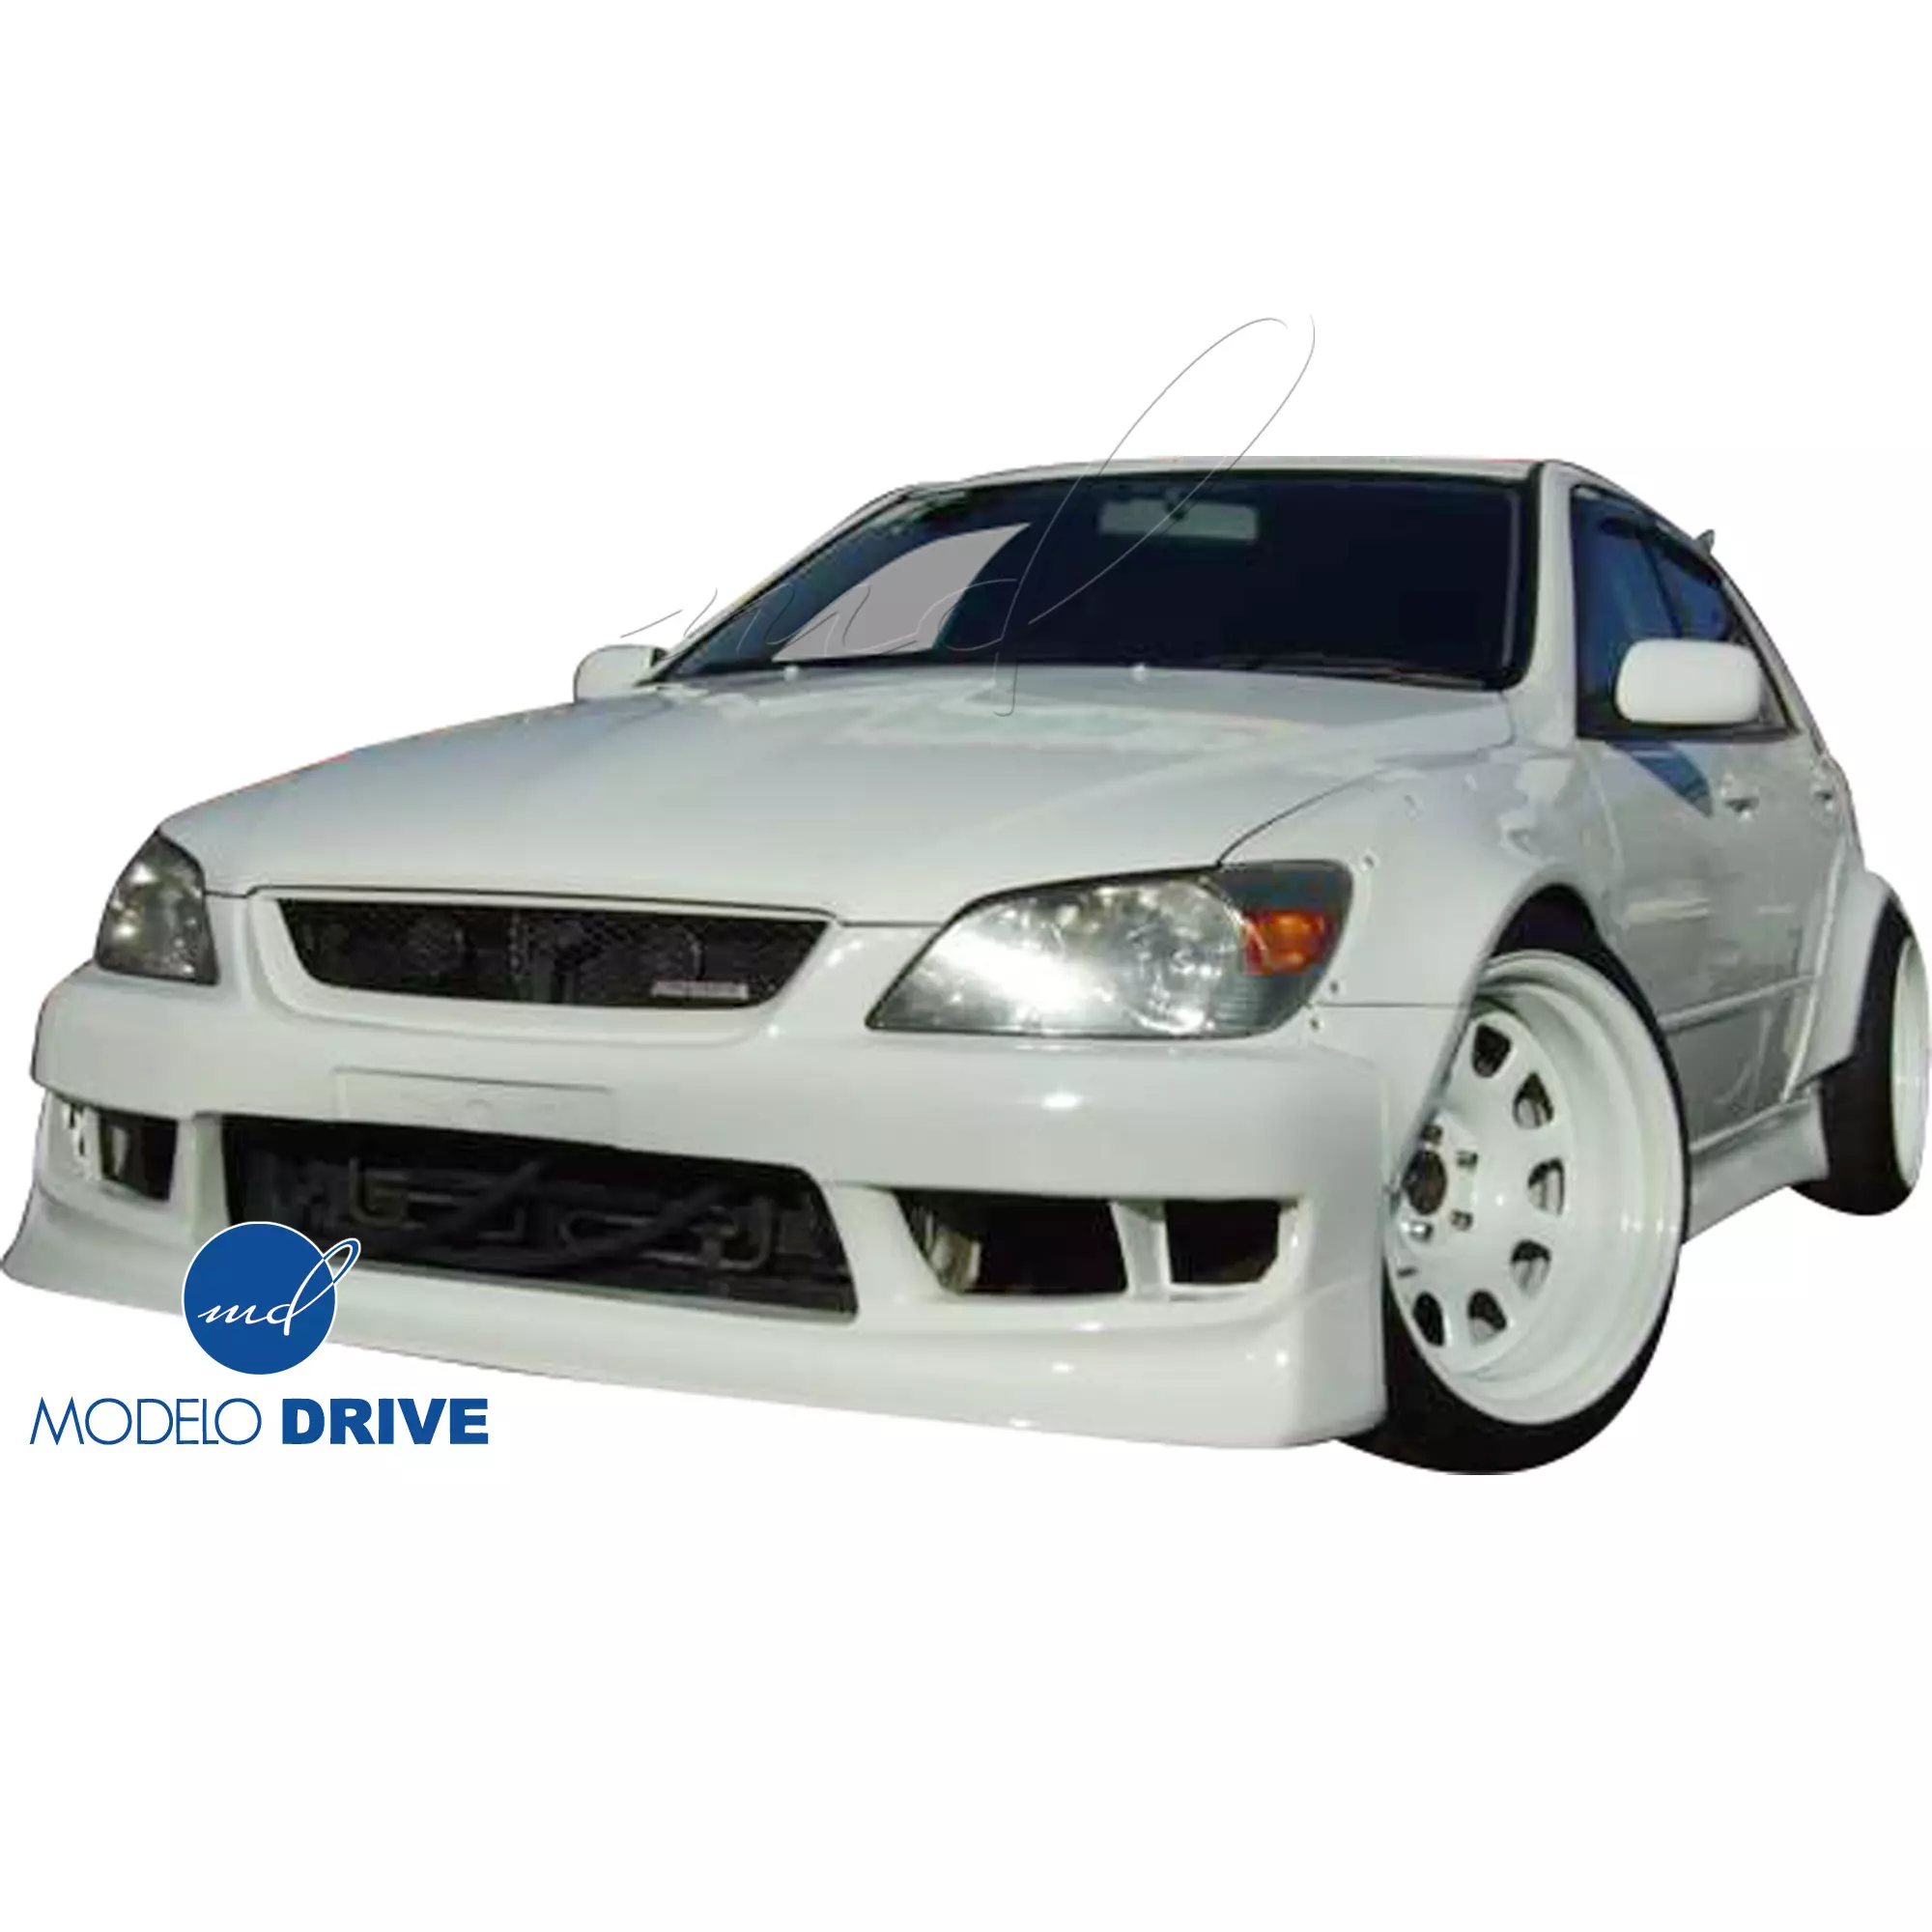 ModeloDrive FRP MSV Wide Body 30/65 Fender Flare Set 8pc > Lexus IS Series IS300 2000-2005> 4dr - Image 7